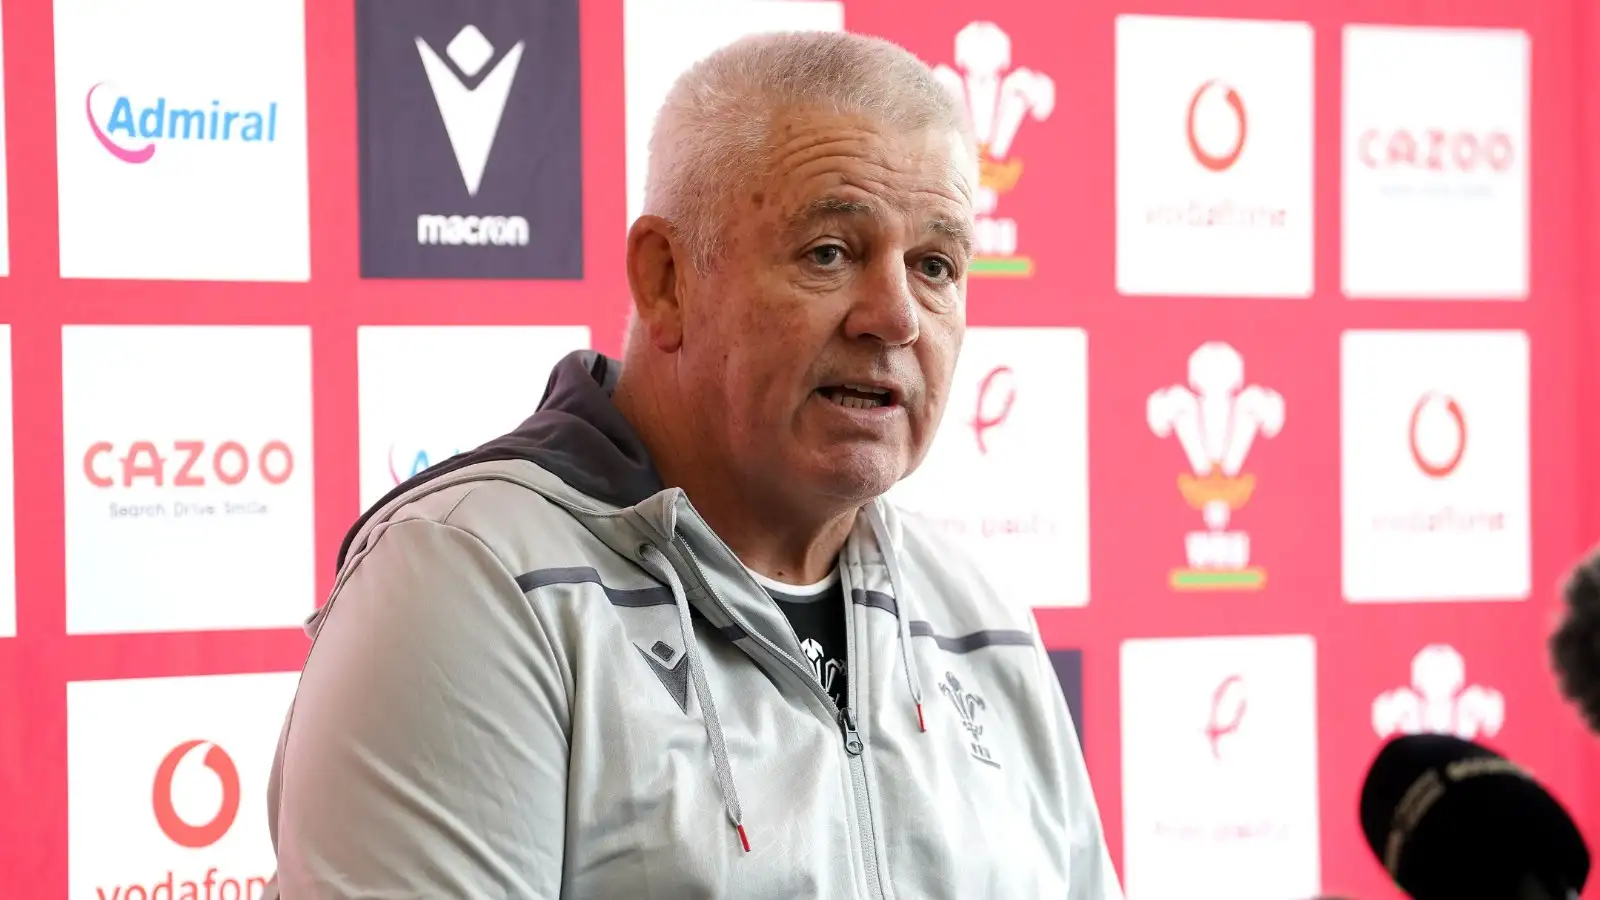 strike action Wales head coach Warren Gatland has remained confident that the Six Nations clash against England will go ahead despite the dispute between his players and the Welsh Rugby Union.